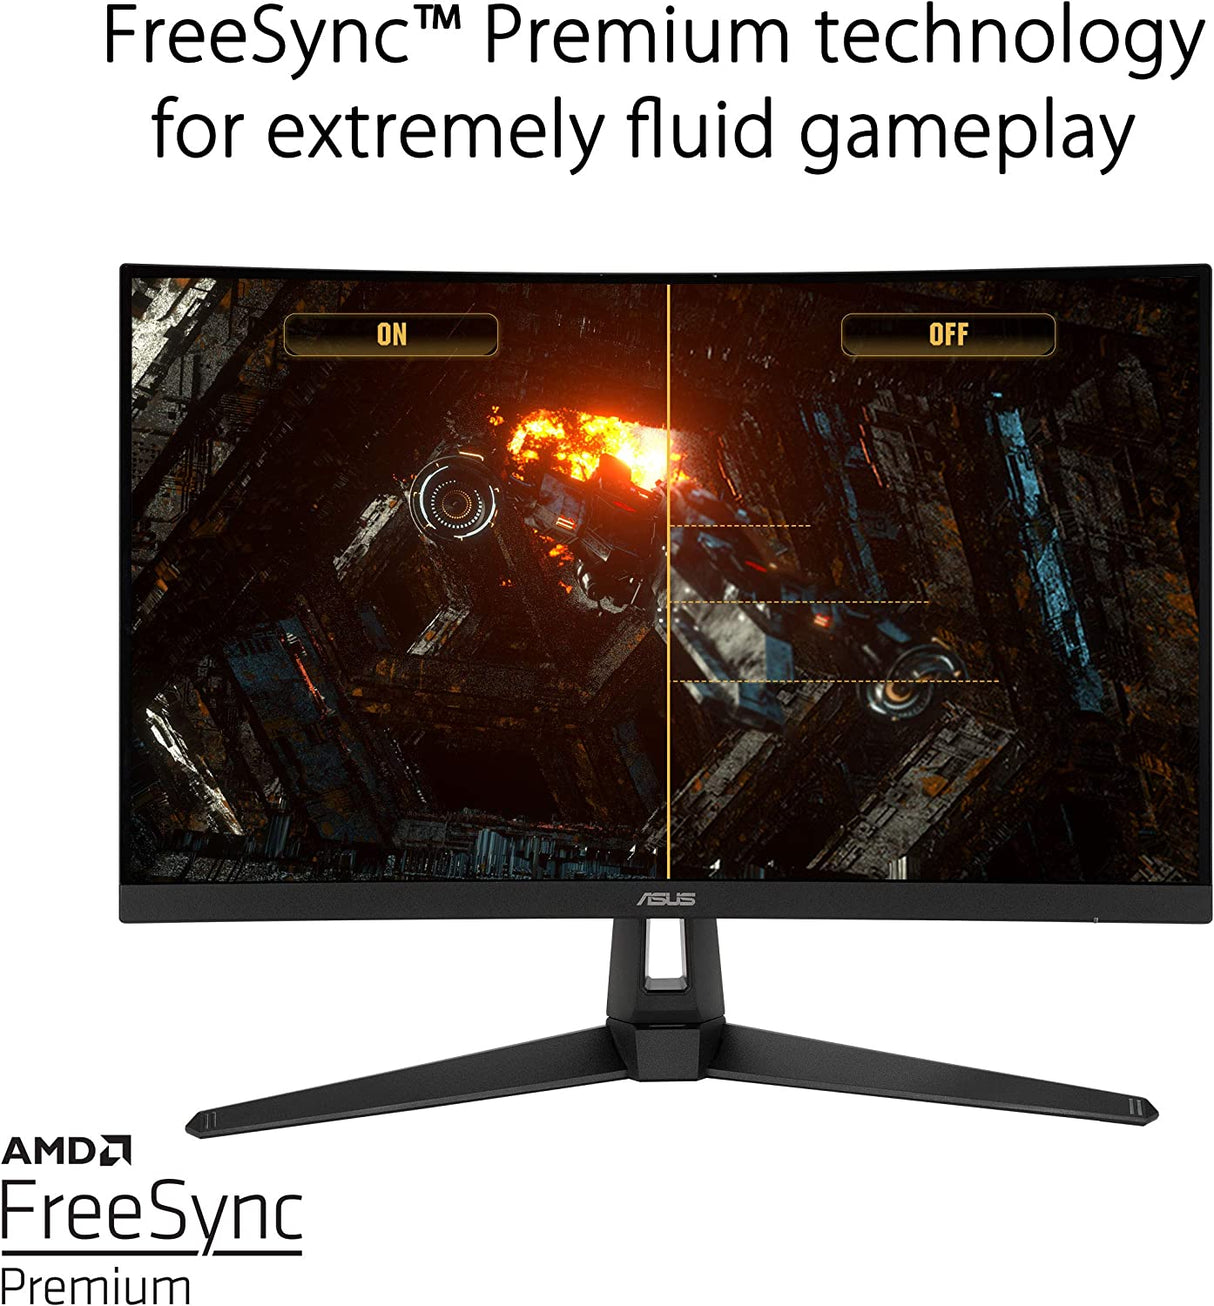 ASUS TUF Gaming 27 2K HDR Gaming Monitor (VG27AQ) - QHD (2560 x 1440),  165Hz (Supports 144Hz), 1ms, Extreme Low Motion Blur, Speaker, G-SYNC